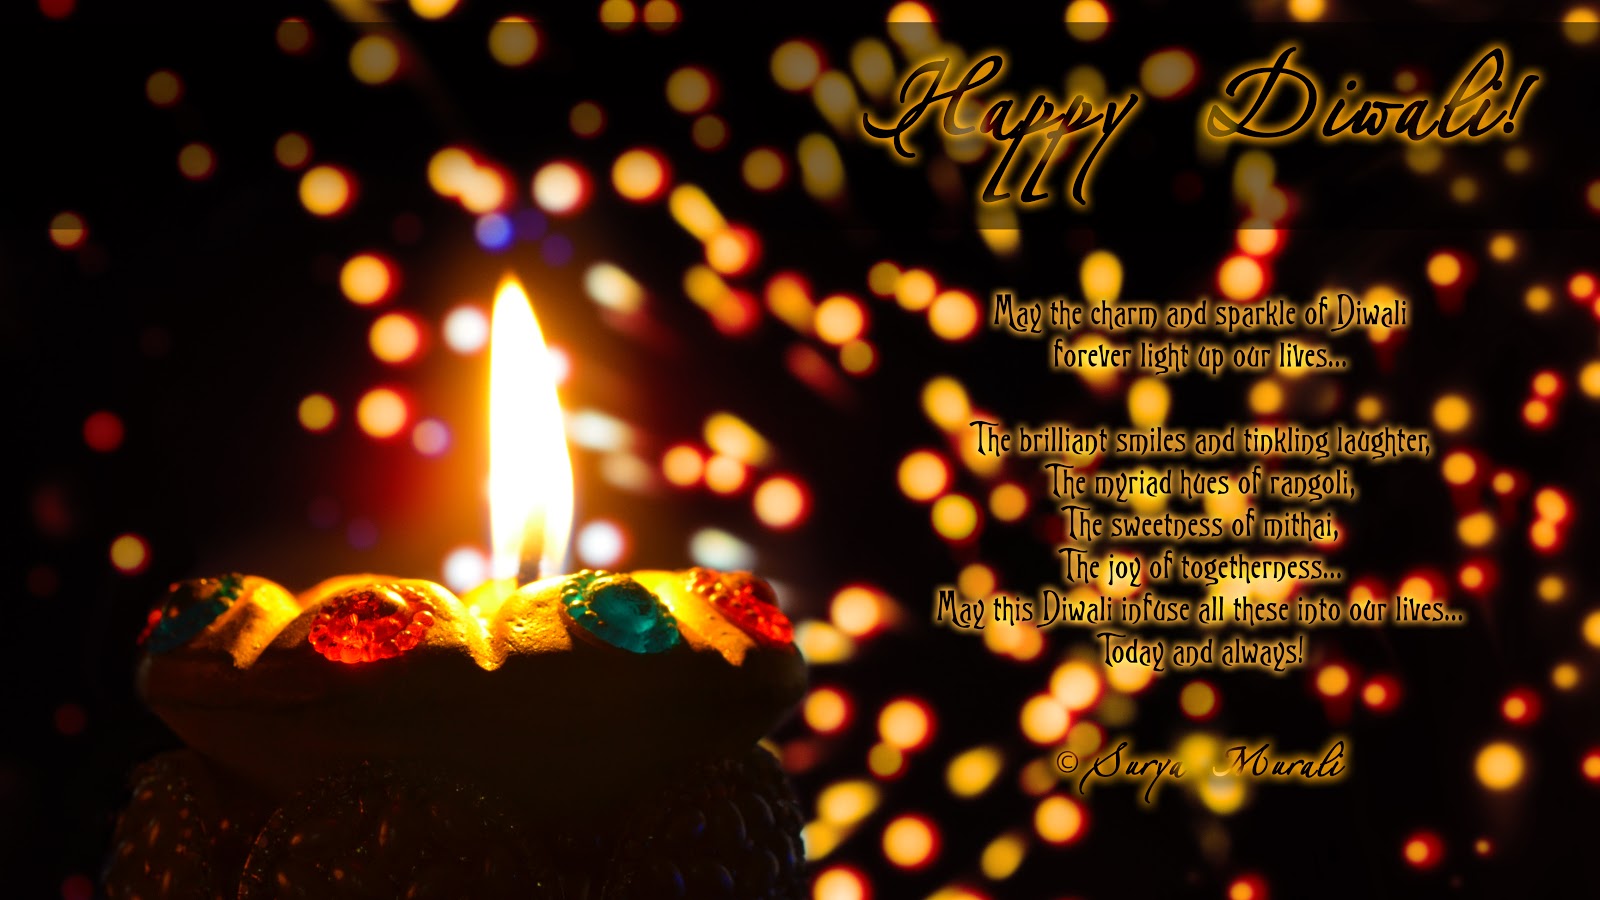 Best Diwali Hd Wallpapers Quotes To Share With Your - Happy Diwali Hd Quotes - HD Wallpaper 